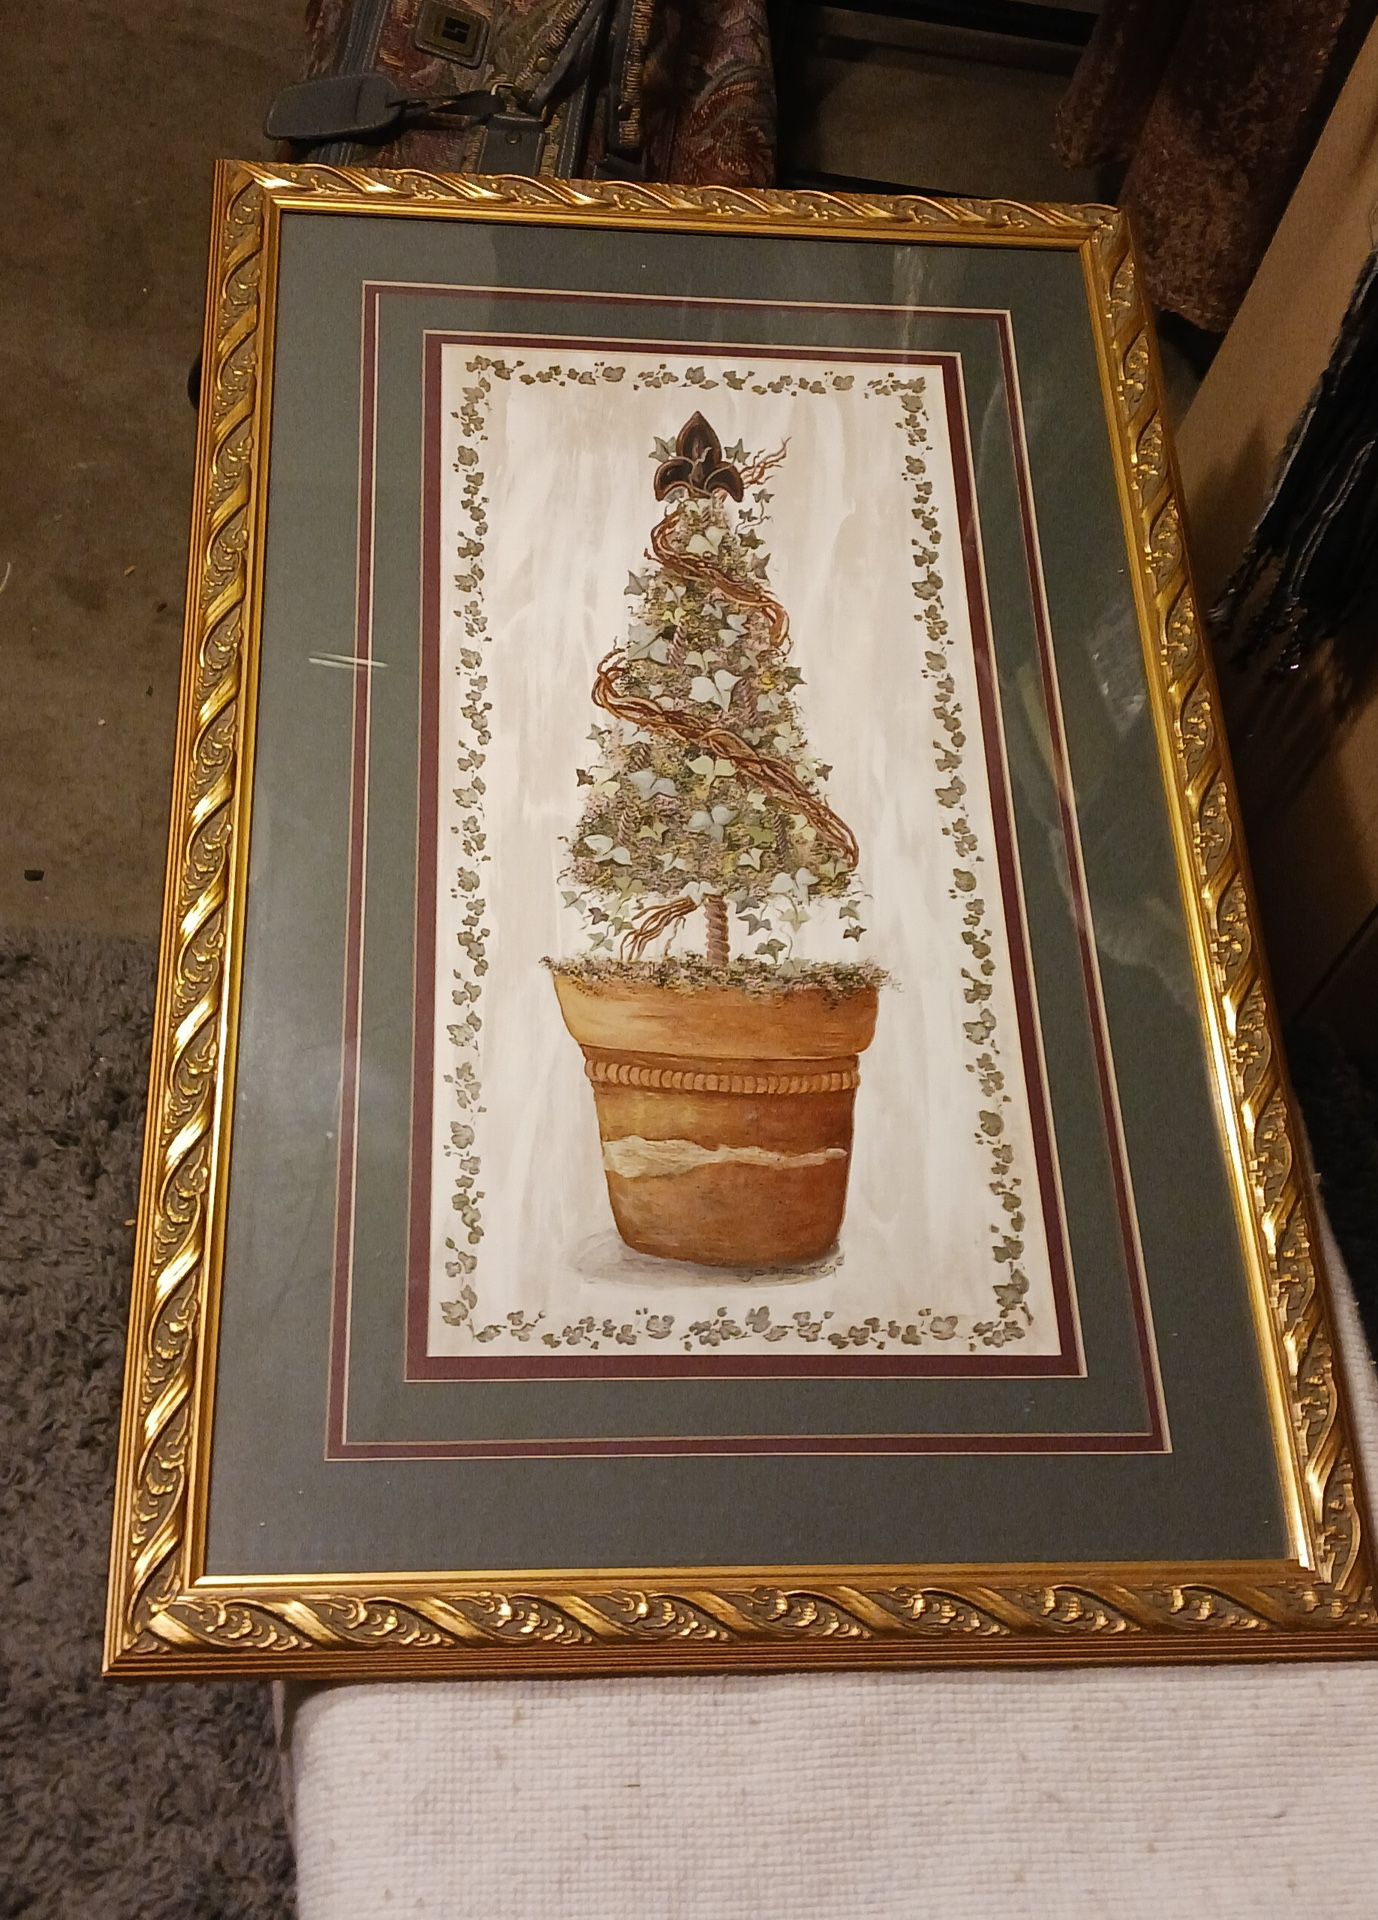 Topiary In Gold  Ornate Frame 28.5 In X 18.5 In Great Condition 